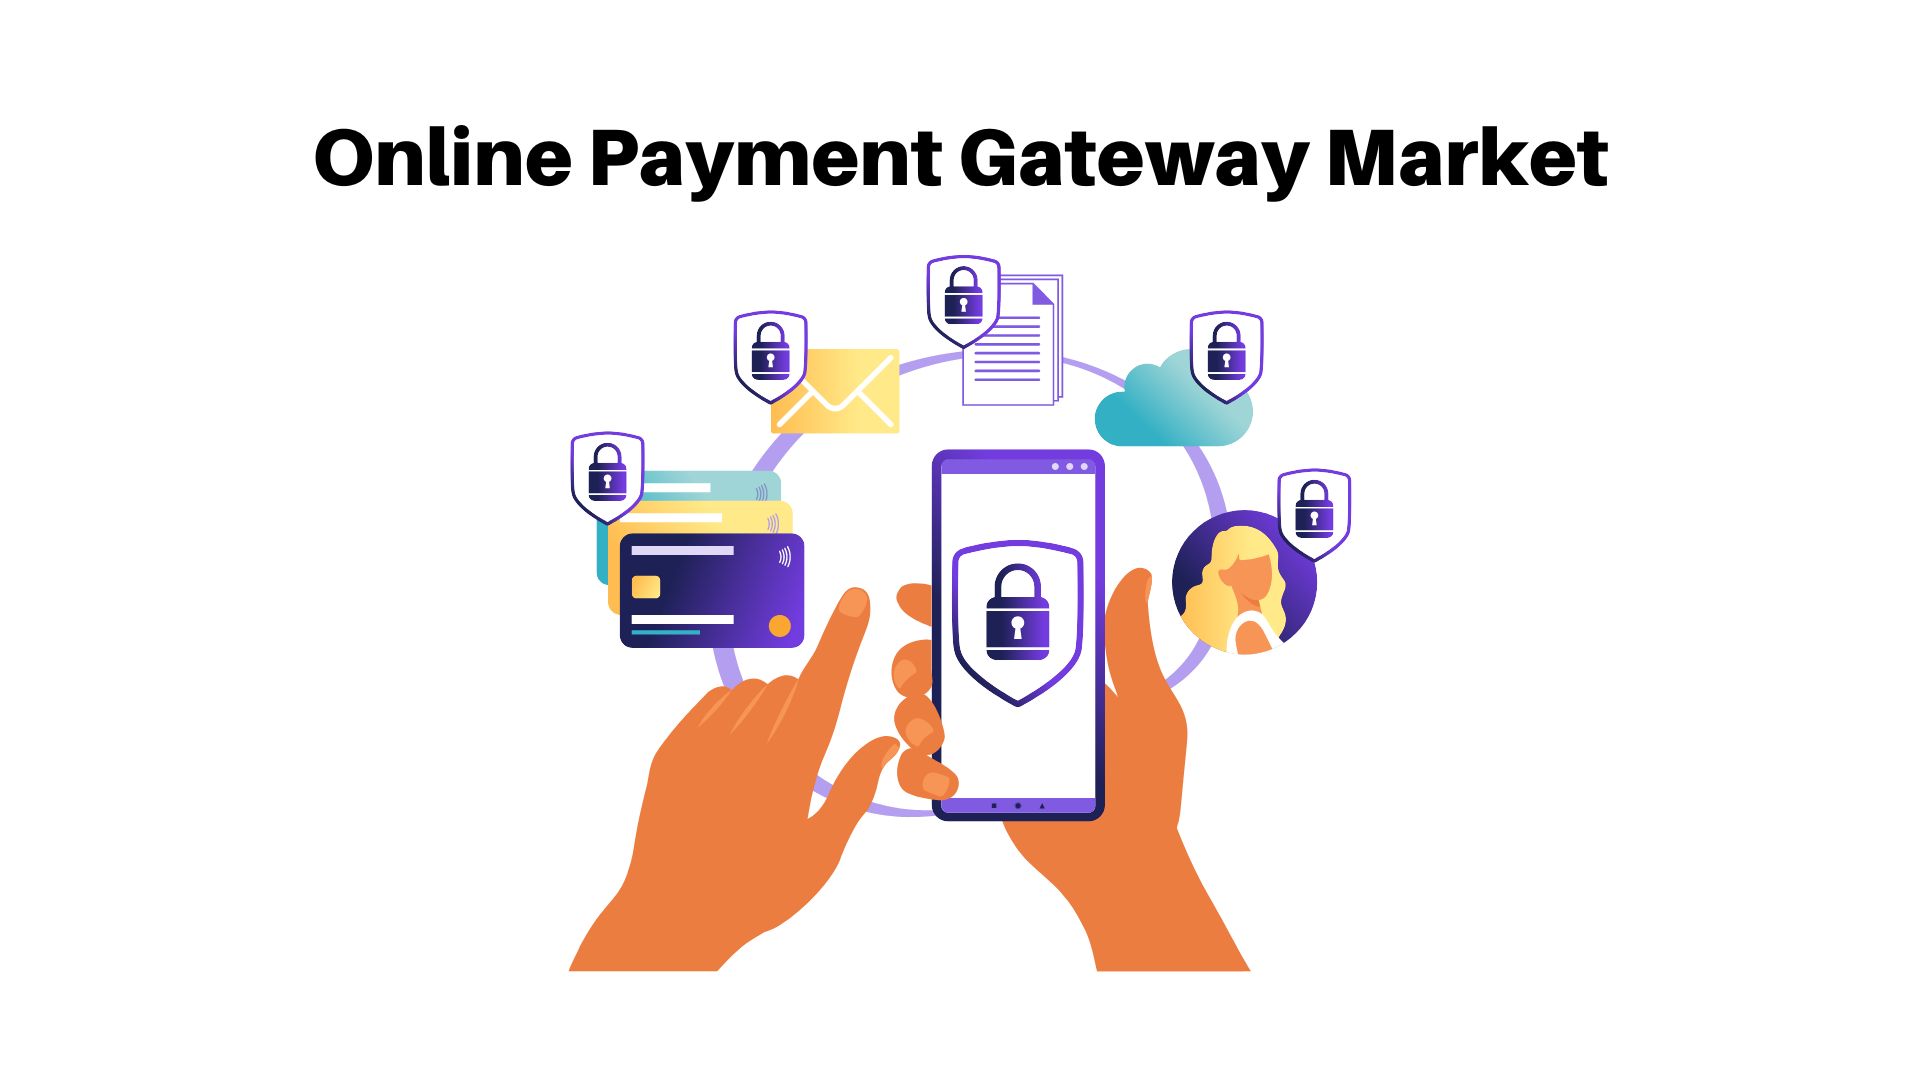 Online Payment Gateway Market is poised to grow at a CAGR of 22.2% by 2032